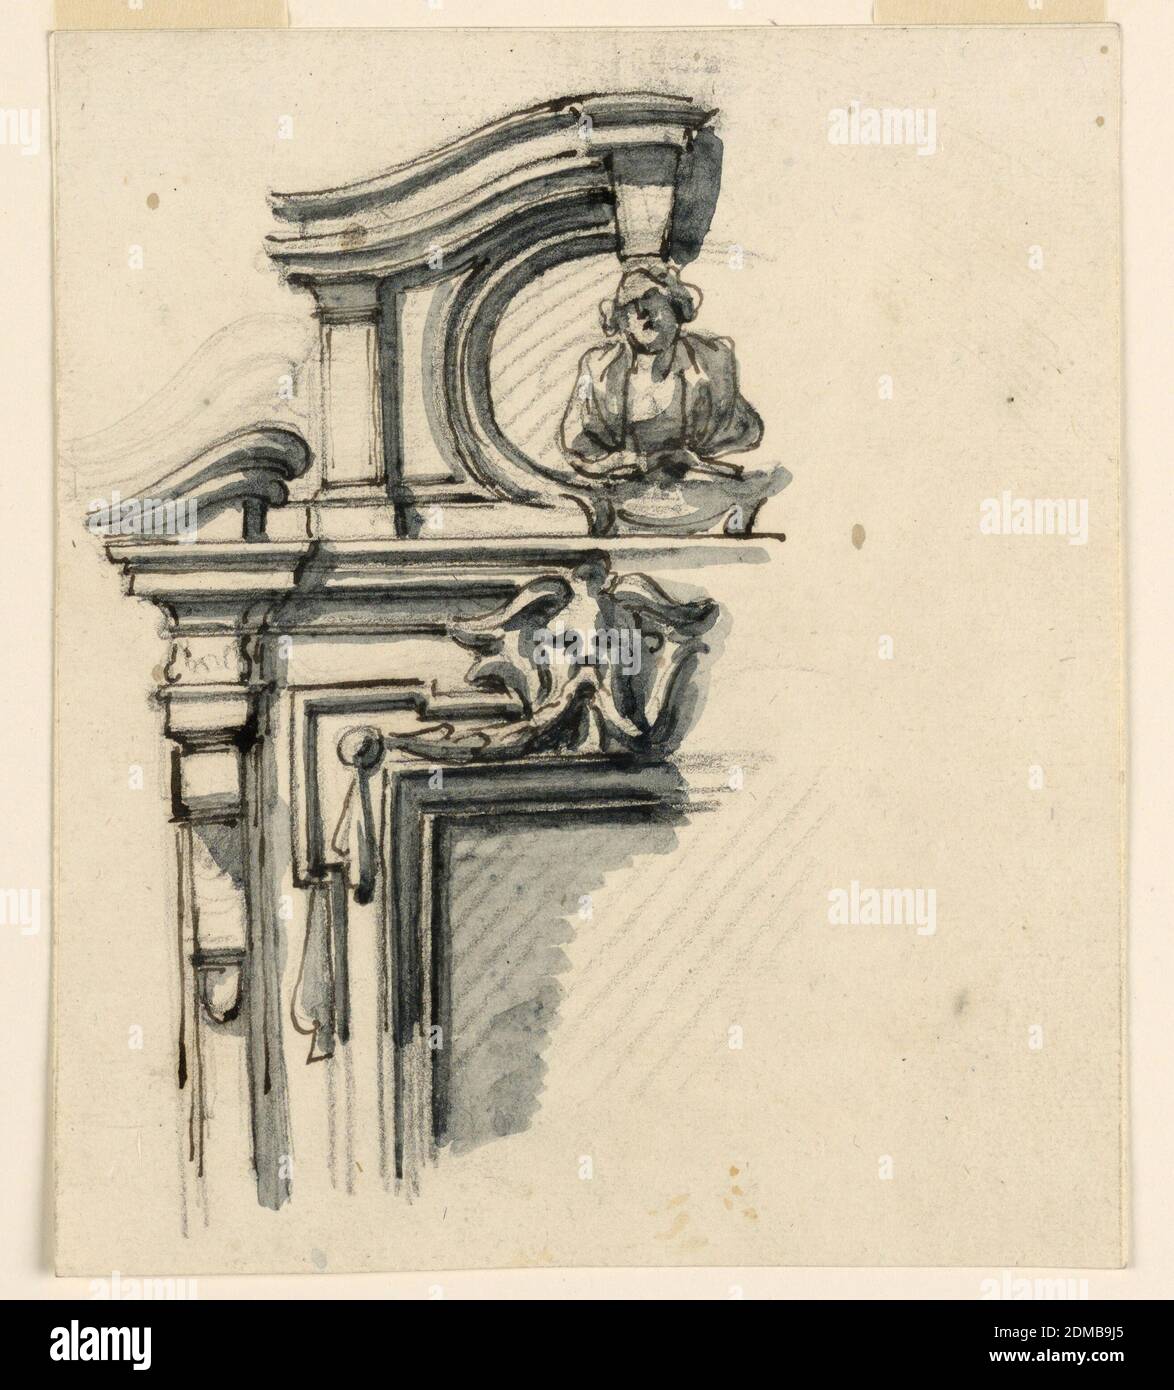 Window Case, Filippo Marchionni, Italian, 1732–1805, Charcoal, pen and ink, brush and dark brown watercolor on laid paper, Broken pediment with very small cornices. The attic of the central part has an opening in which a bust rests. Above the window frame is a mask., Italy, 1740–70, architecture, Drawing Stock Photo